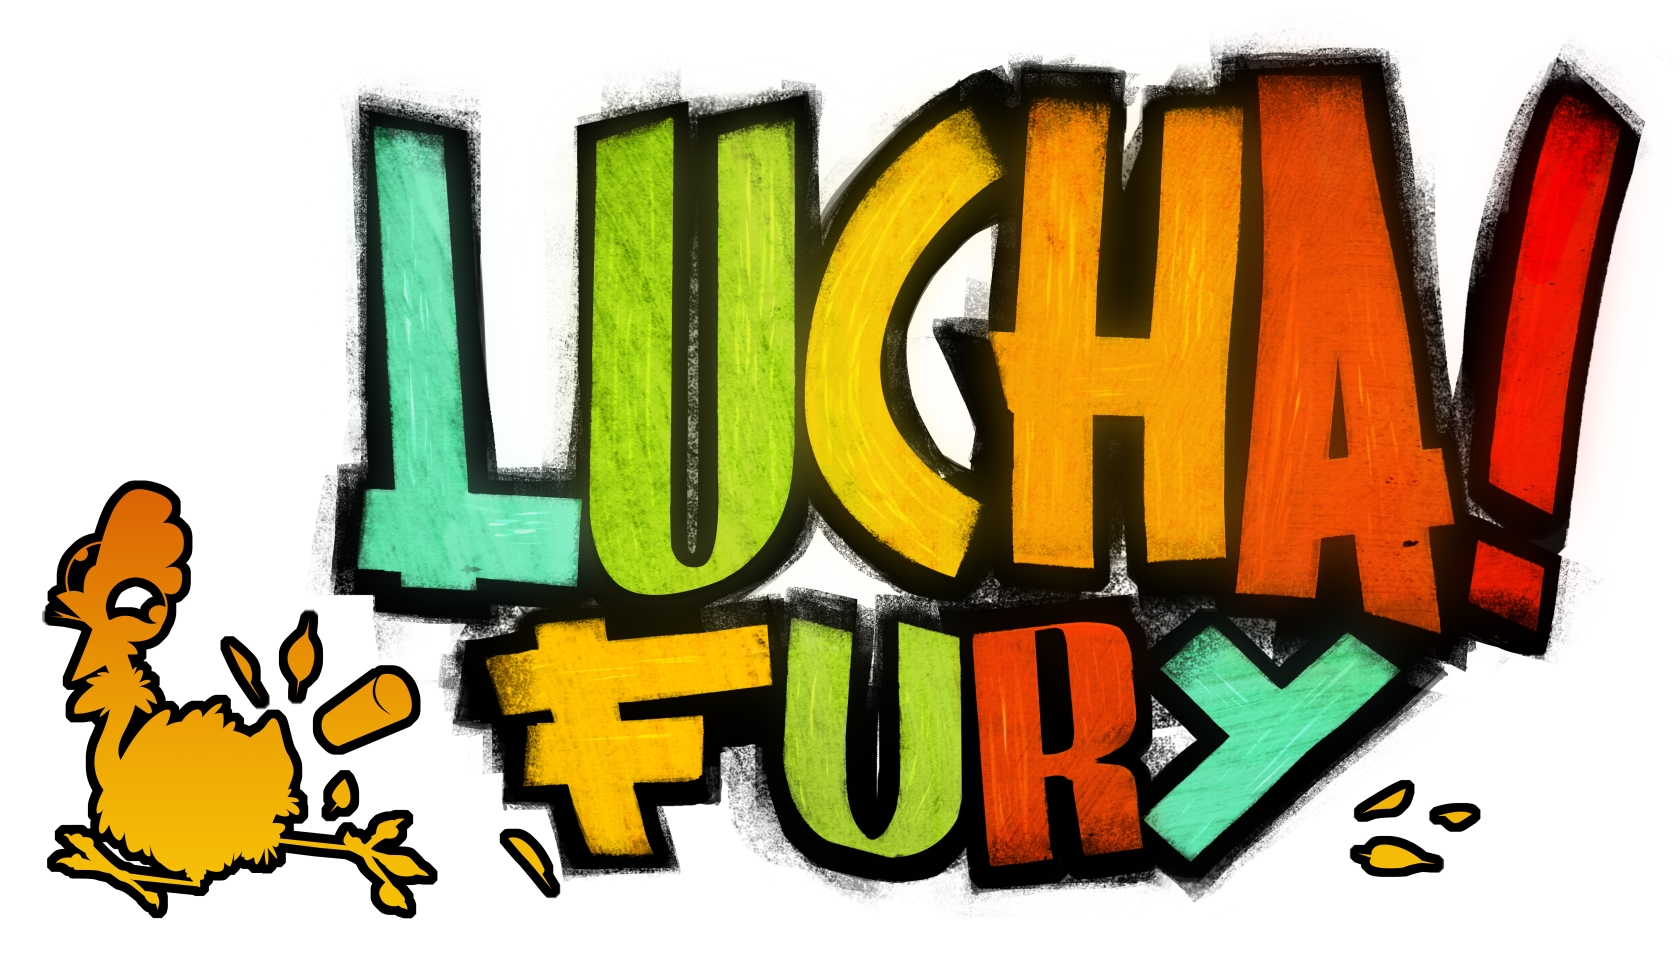 Lucha Fury: Life as a henchman isn’t all its cracked up to be.